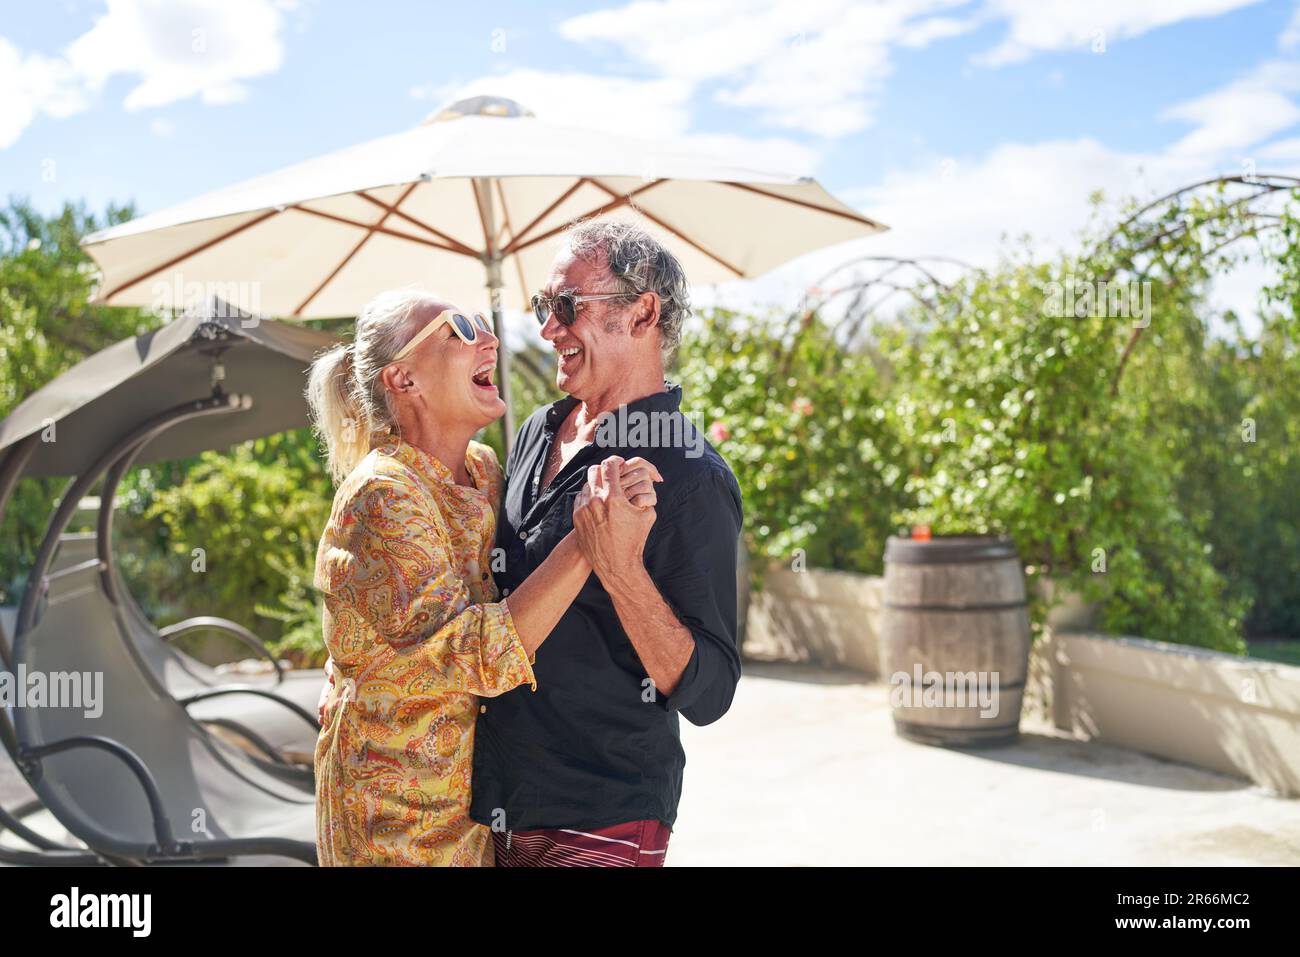 Happy, carefree senior couple laughing and dancing on summer patio Stock Photo